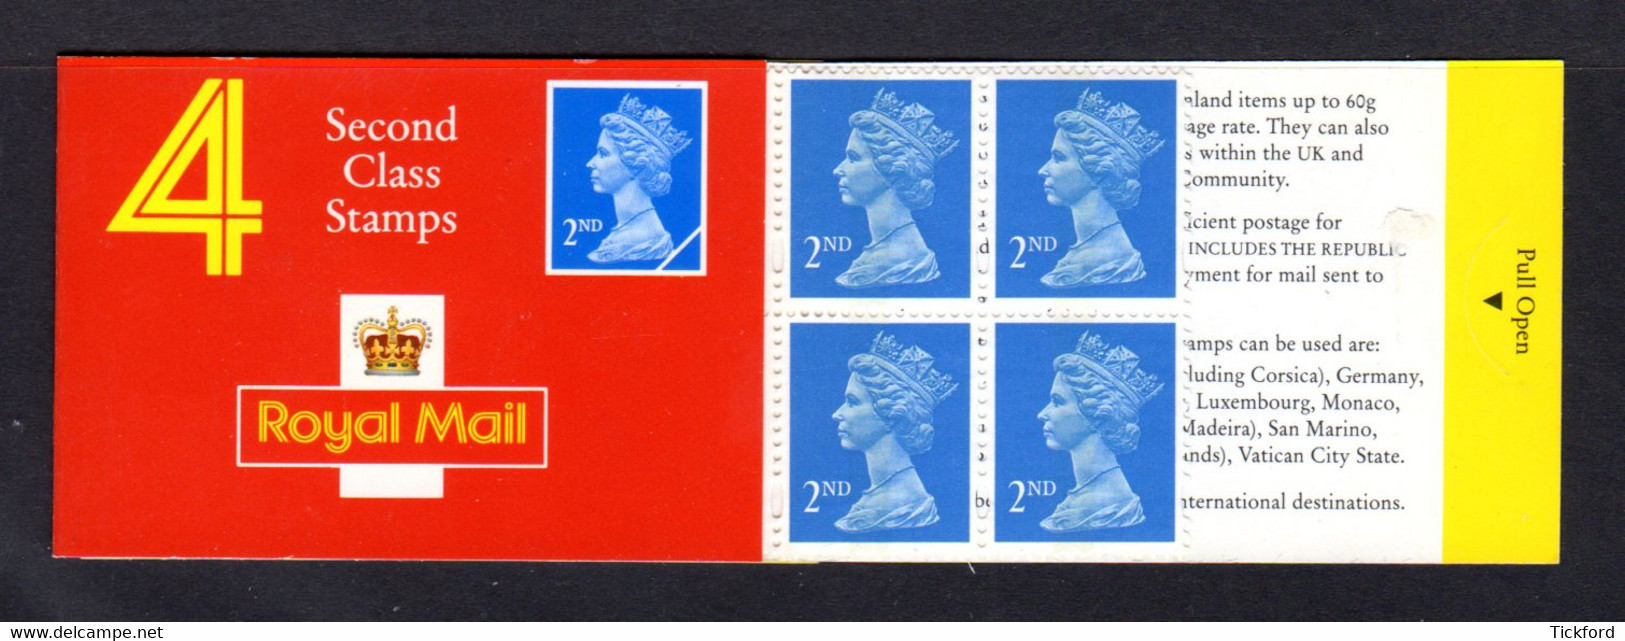 GRANDE-BRETAGNE 1993 - Carnet Yvert C1671-1 - SG HA6 - NEUF** MNH - Barcode Booklet With 4 NVI 2nd Class Stamps - Cuadernillos